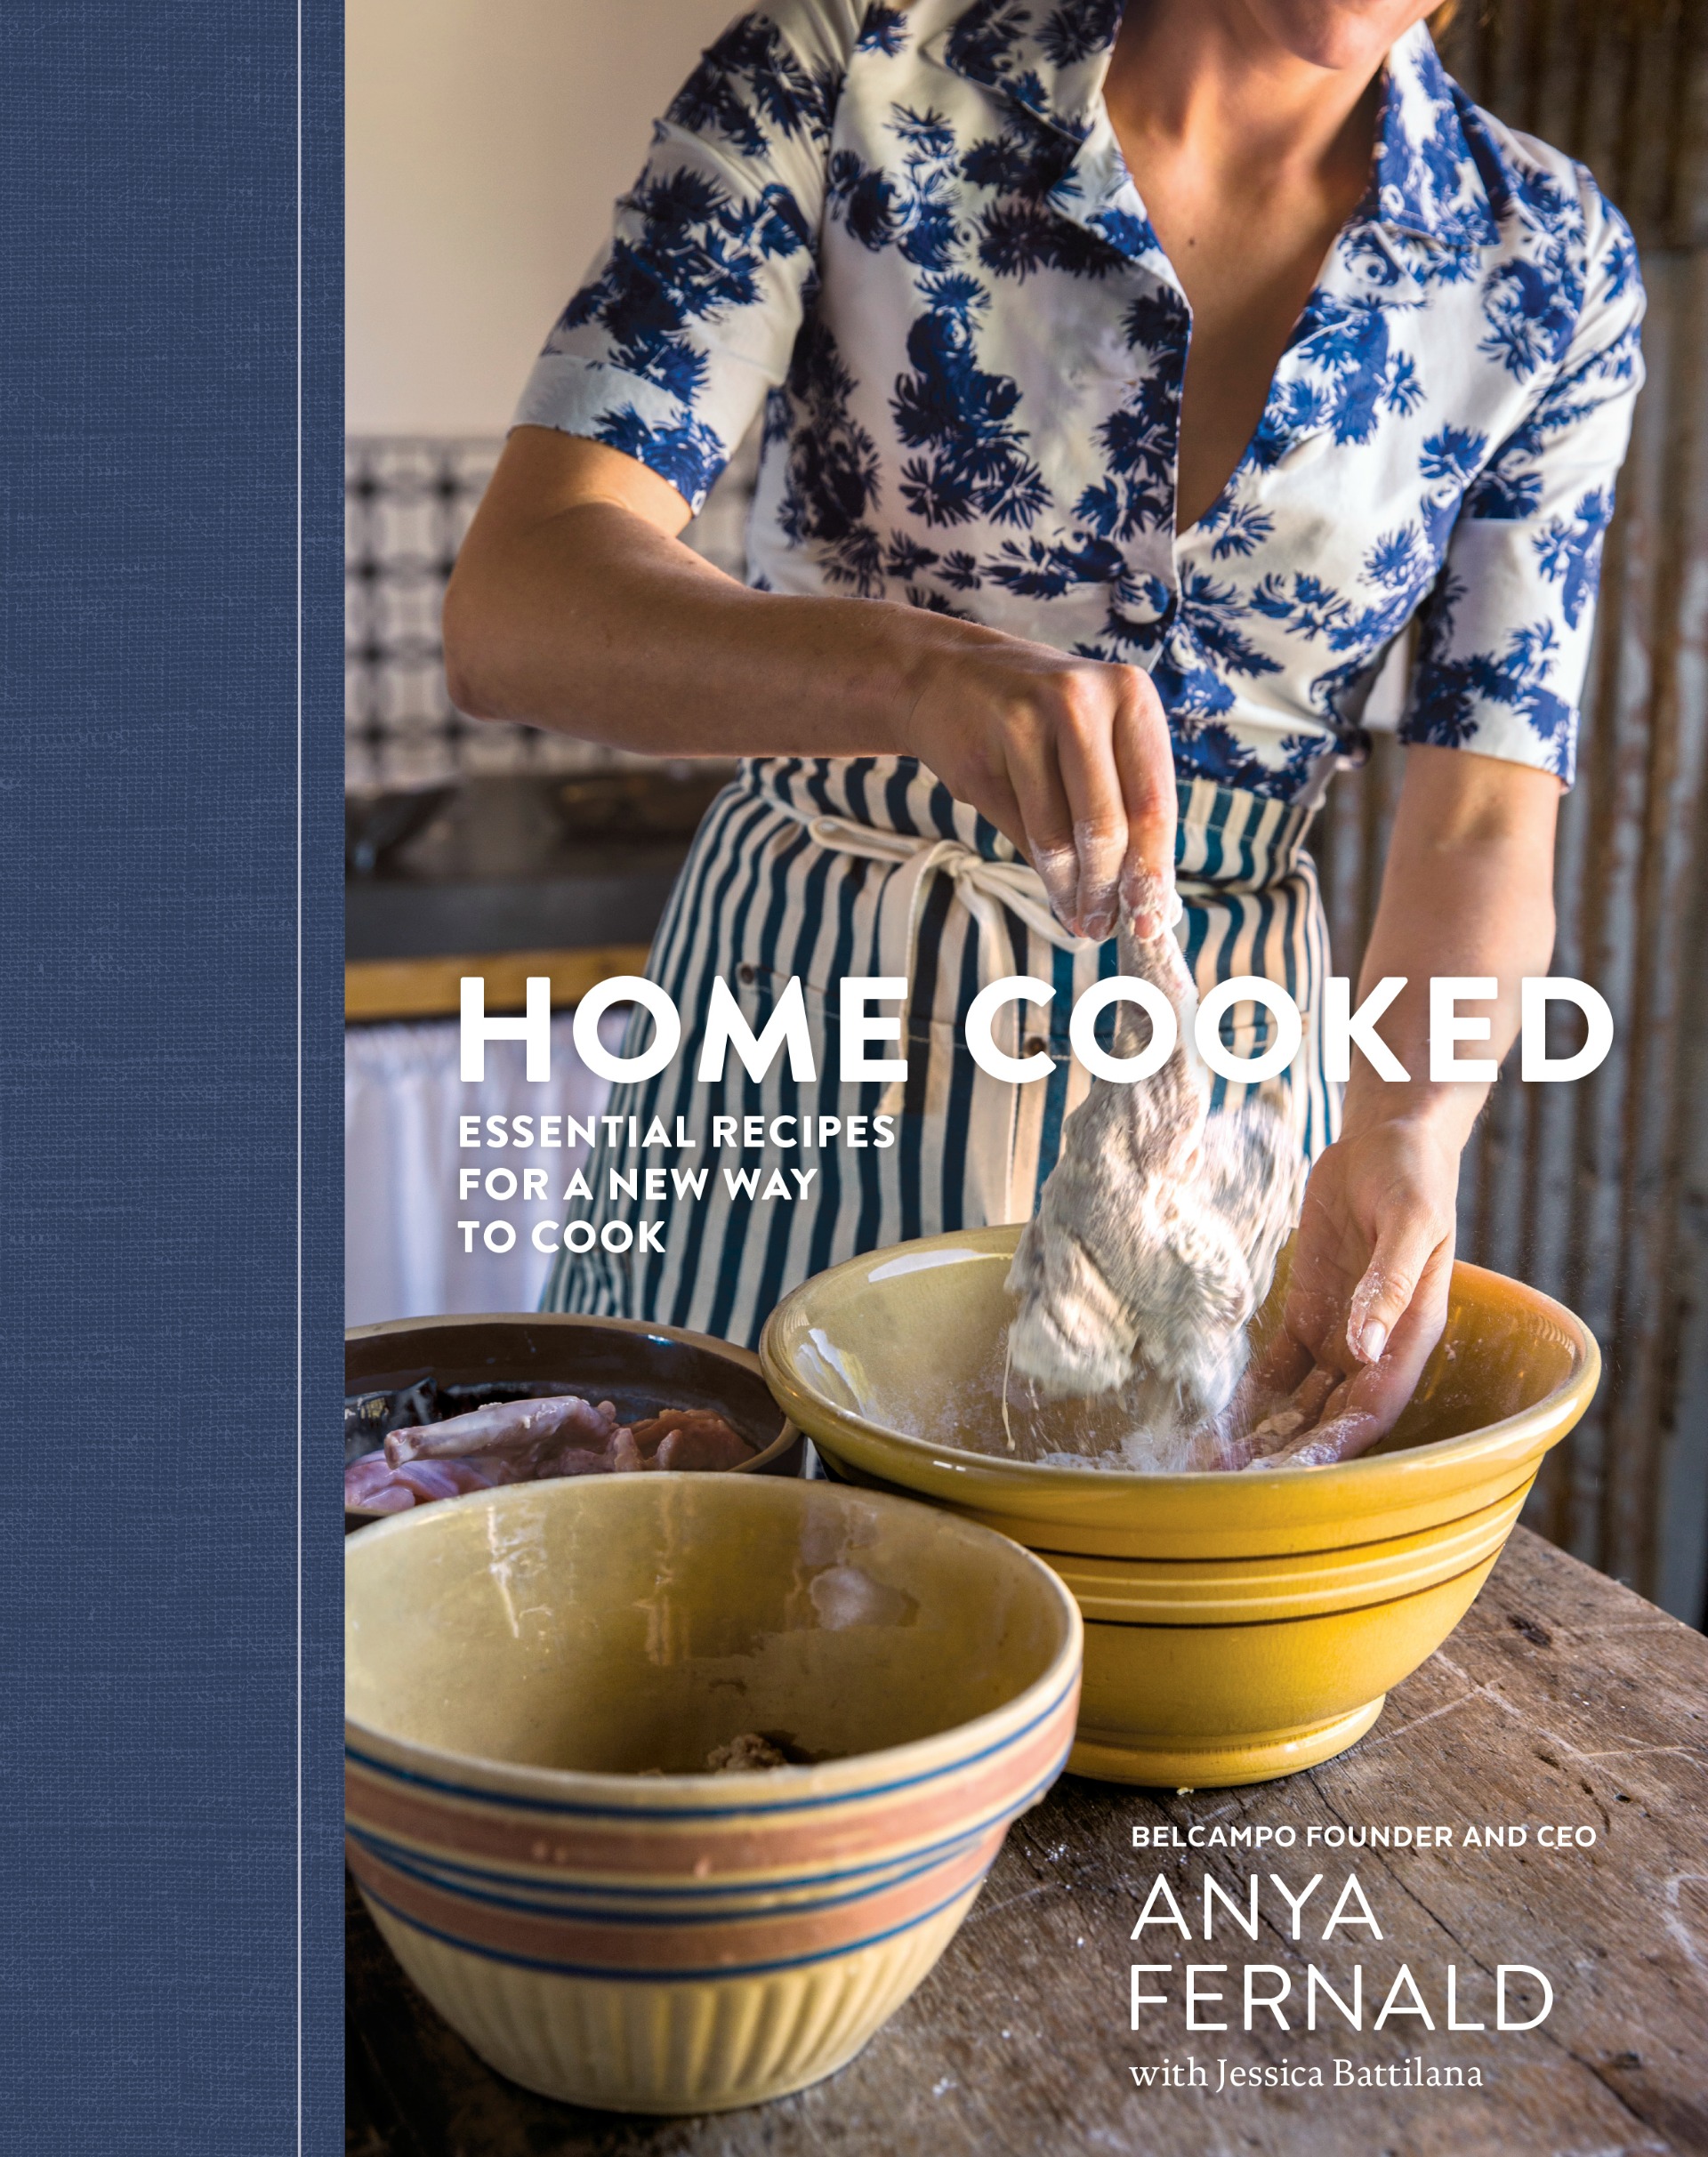 Home Cooked: Essential Recipes for a New Way to Cook Kindle Edition by Anya Fernald.